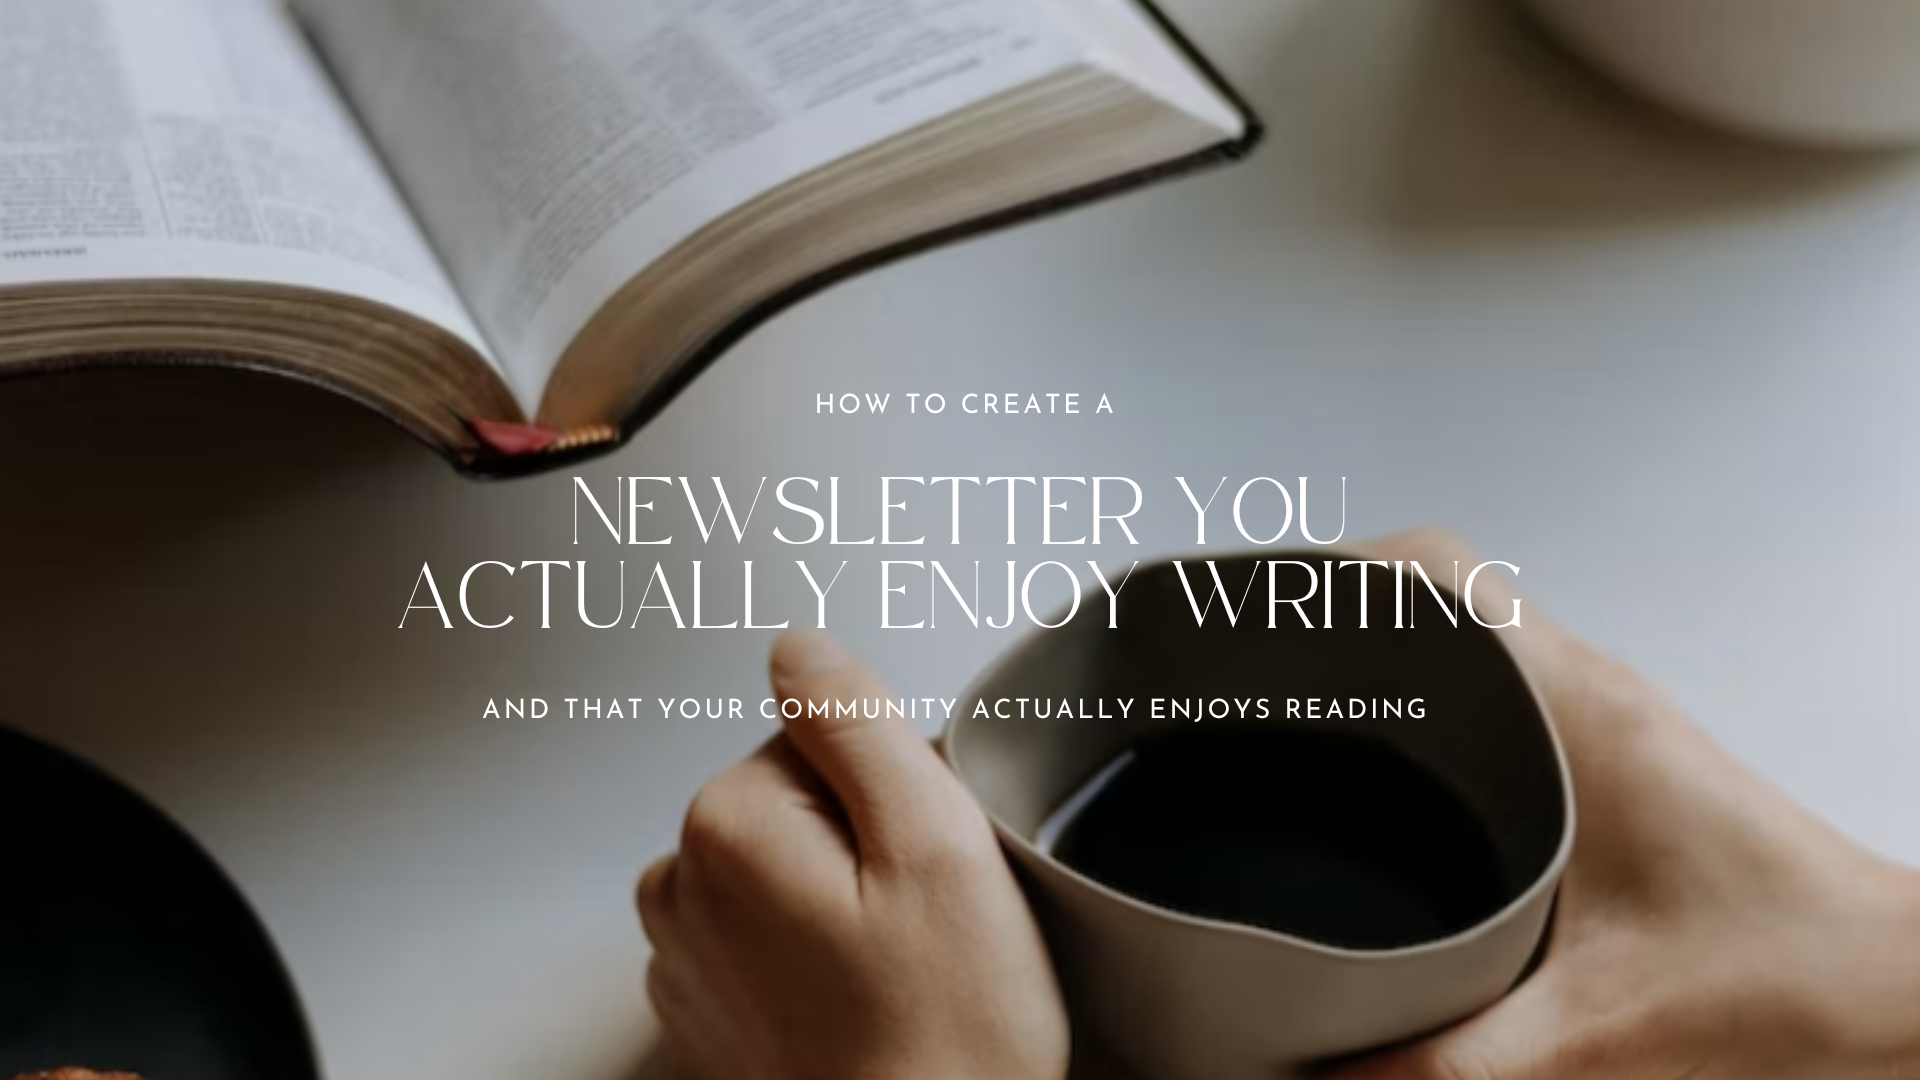 How to Create a Newsletter You Actually Enjoy Writing